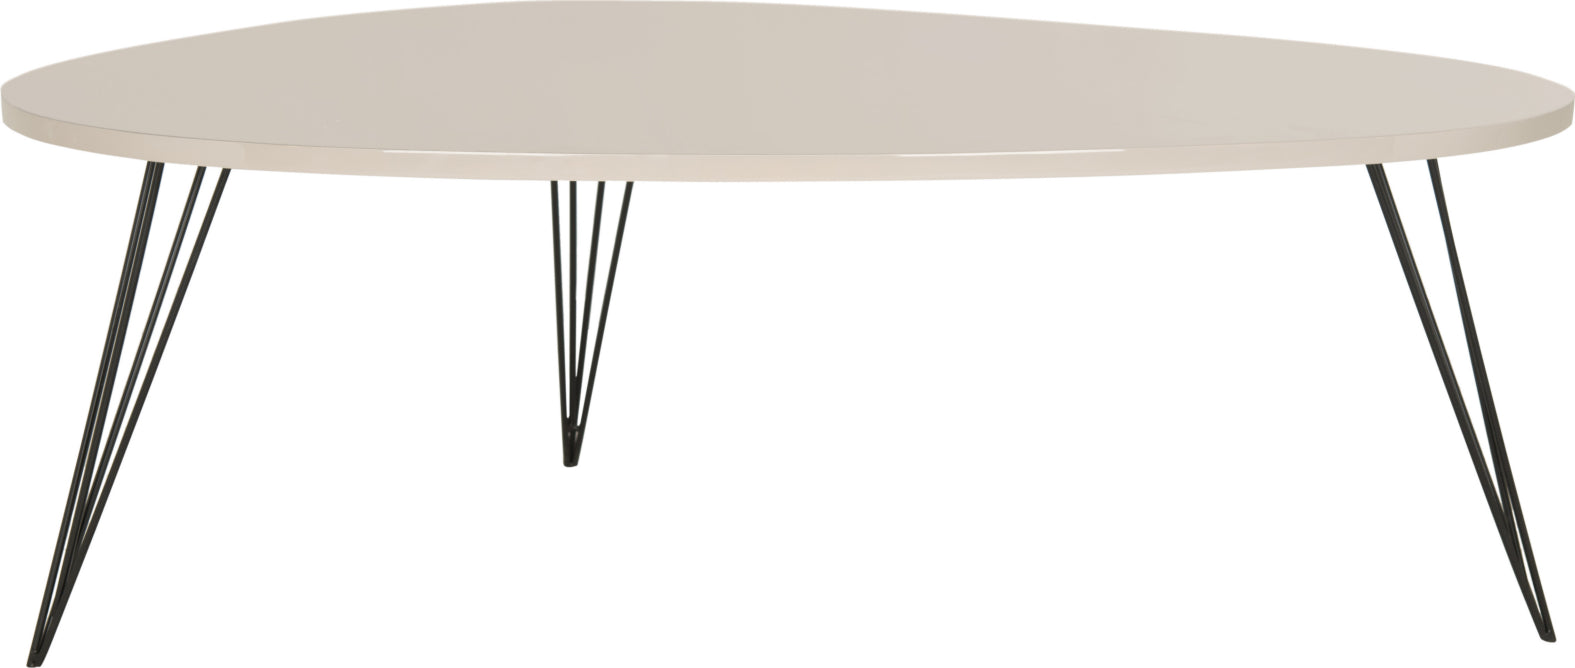 Safavieh Wynton Retro Mid Century Lacquer Coffee Table Taupe and Black Furniture main image